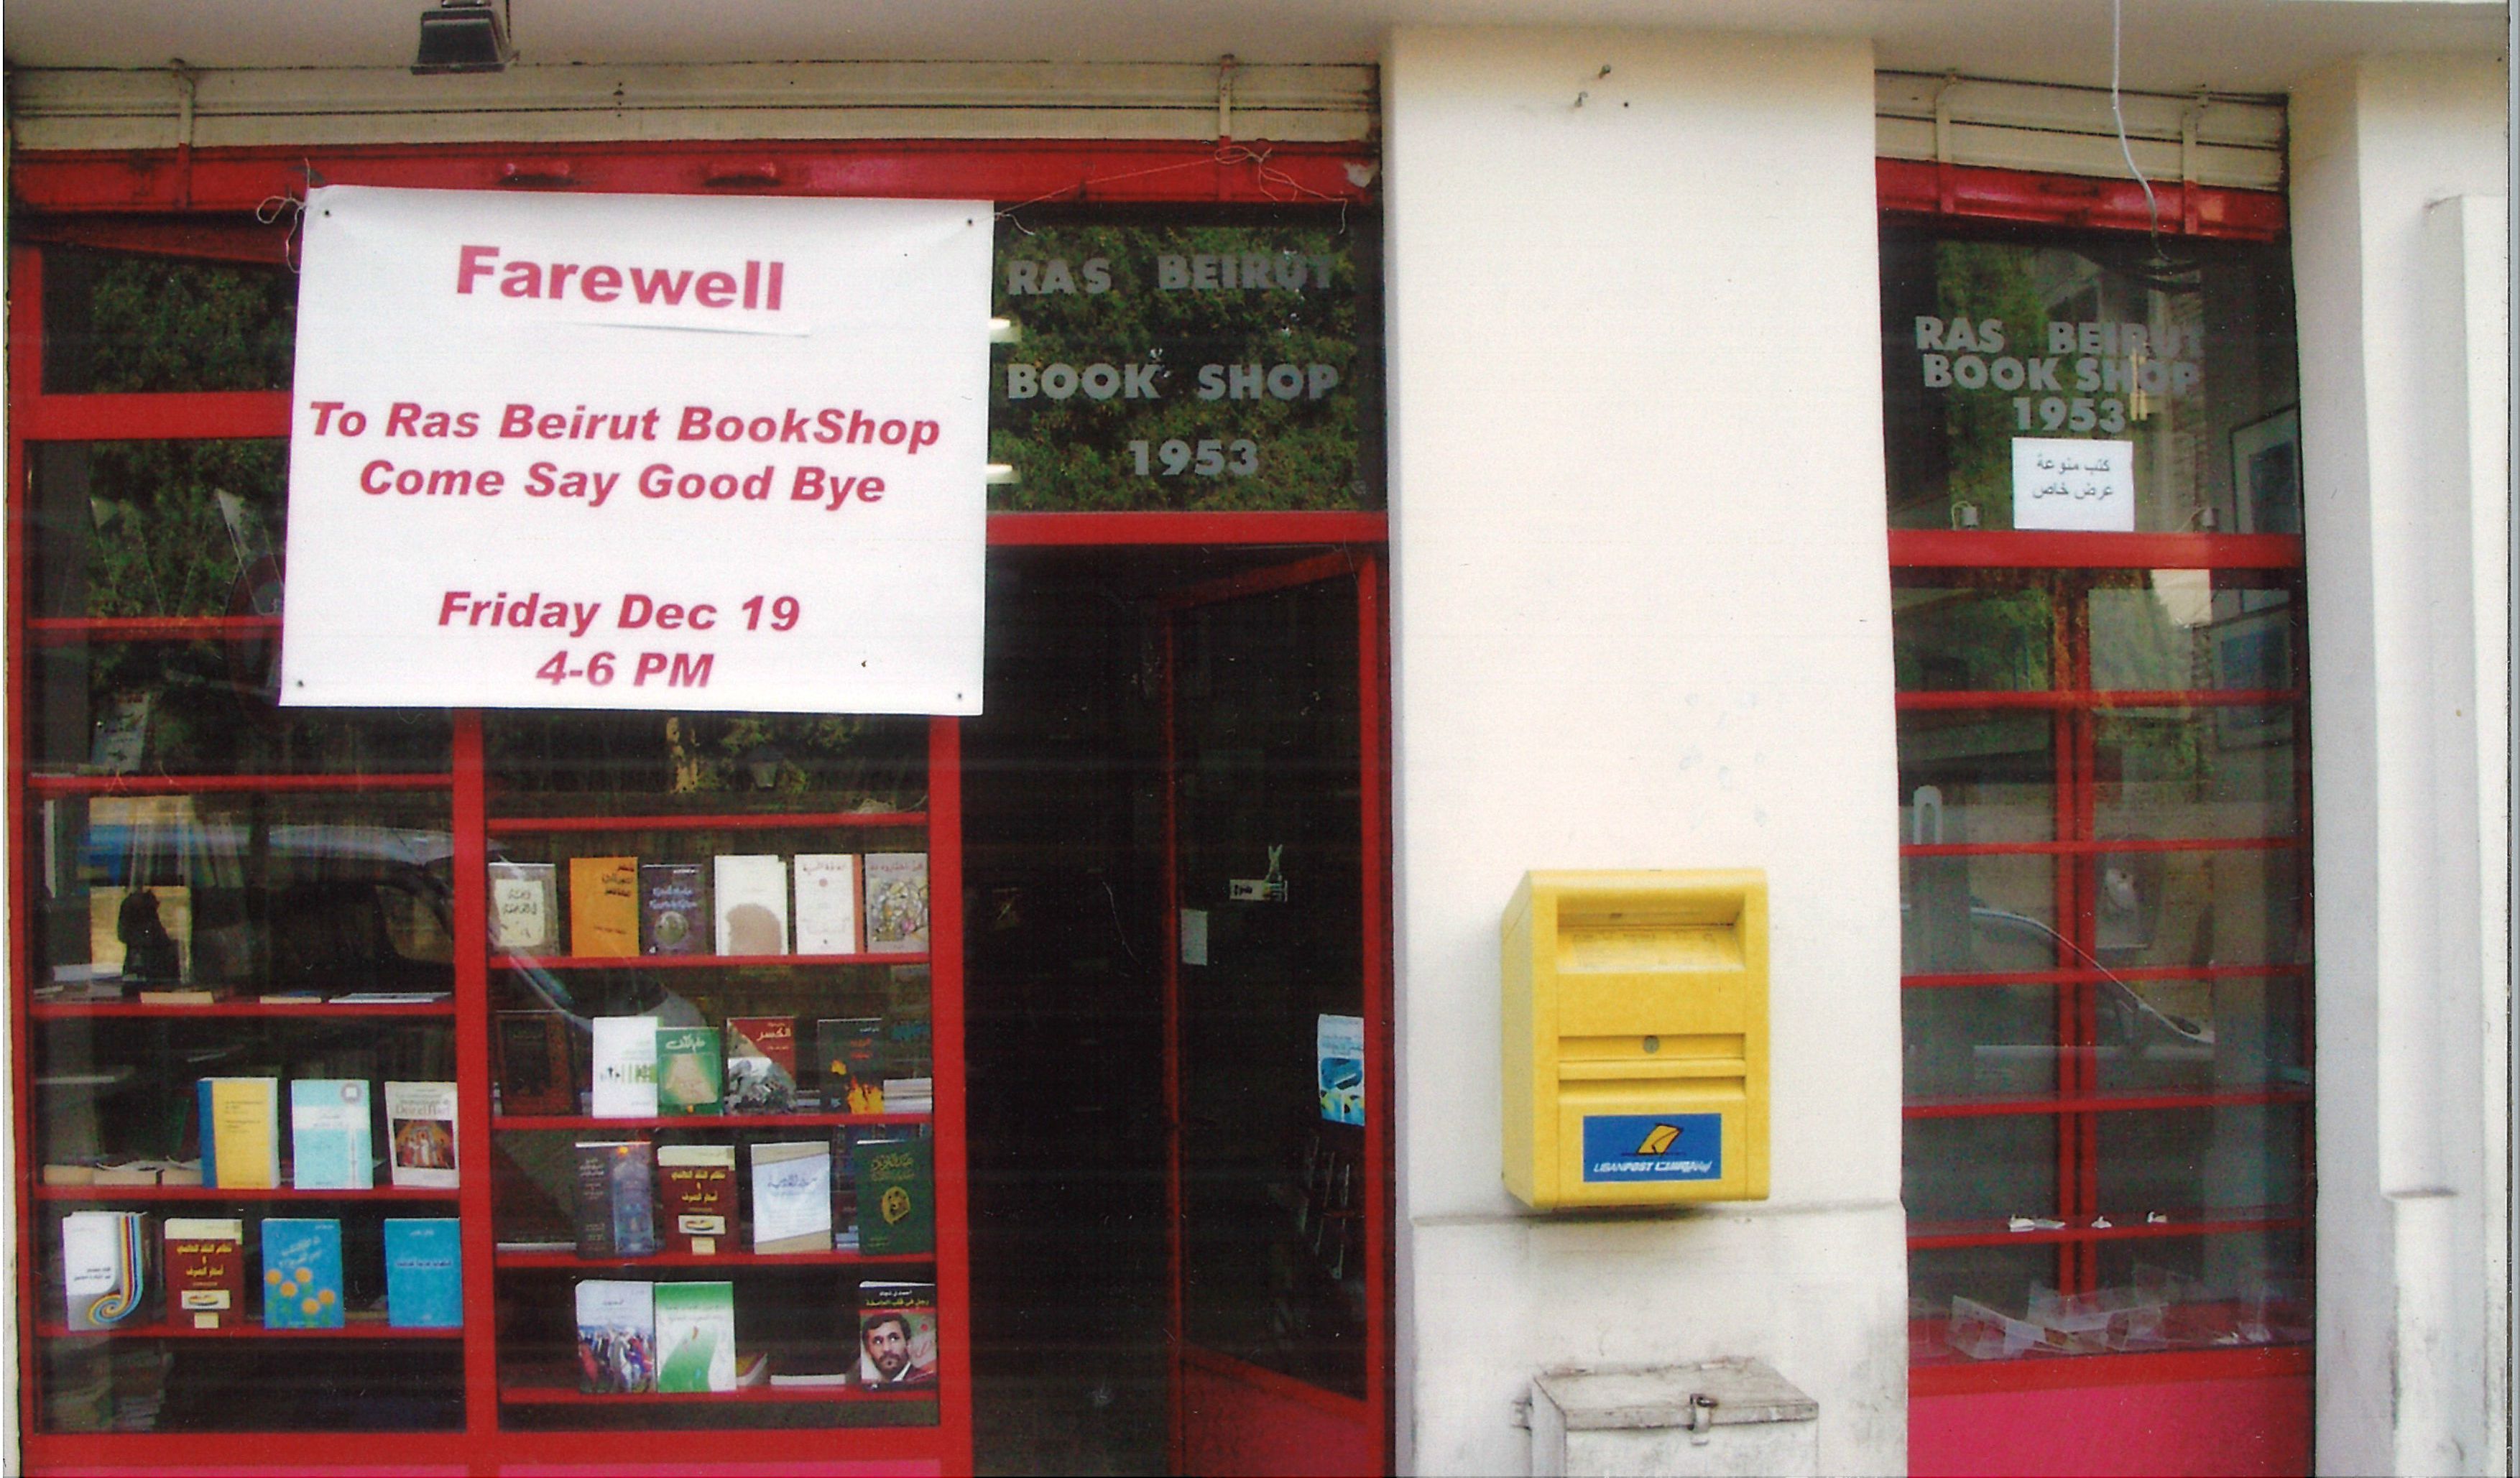 Farewell for the Ras Beirut Bookshop, 2008 (American University of Beirut, University Libraries, Archives and Special Collections)